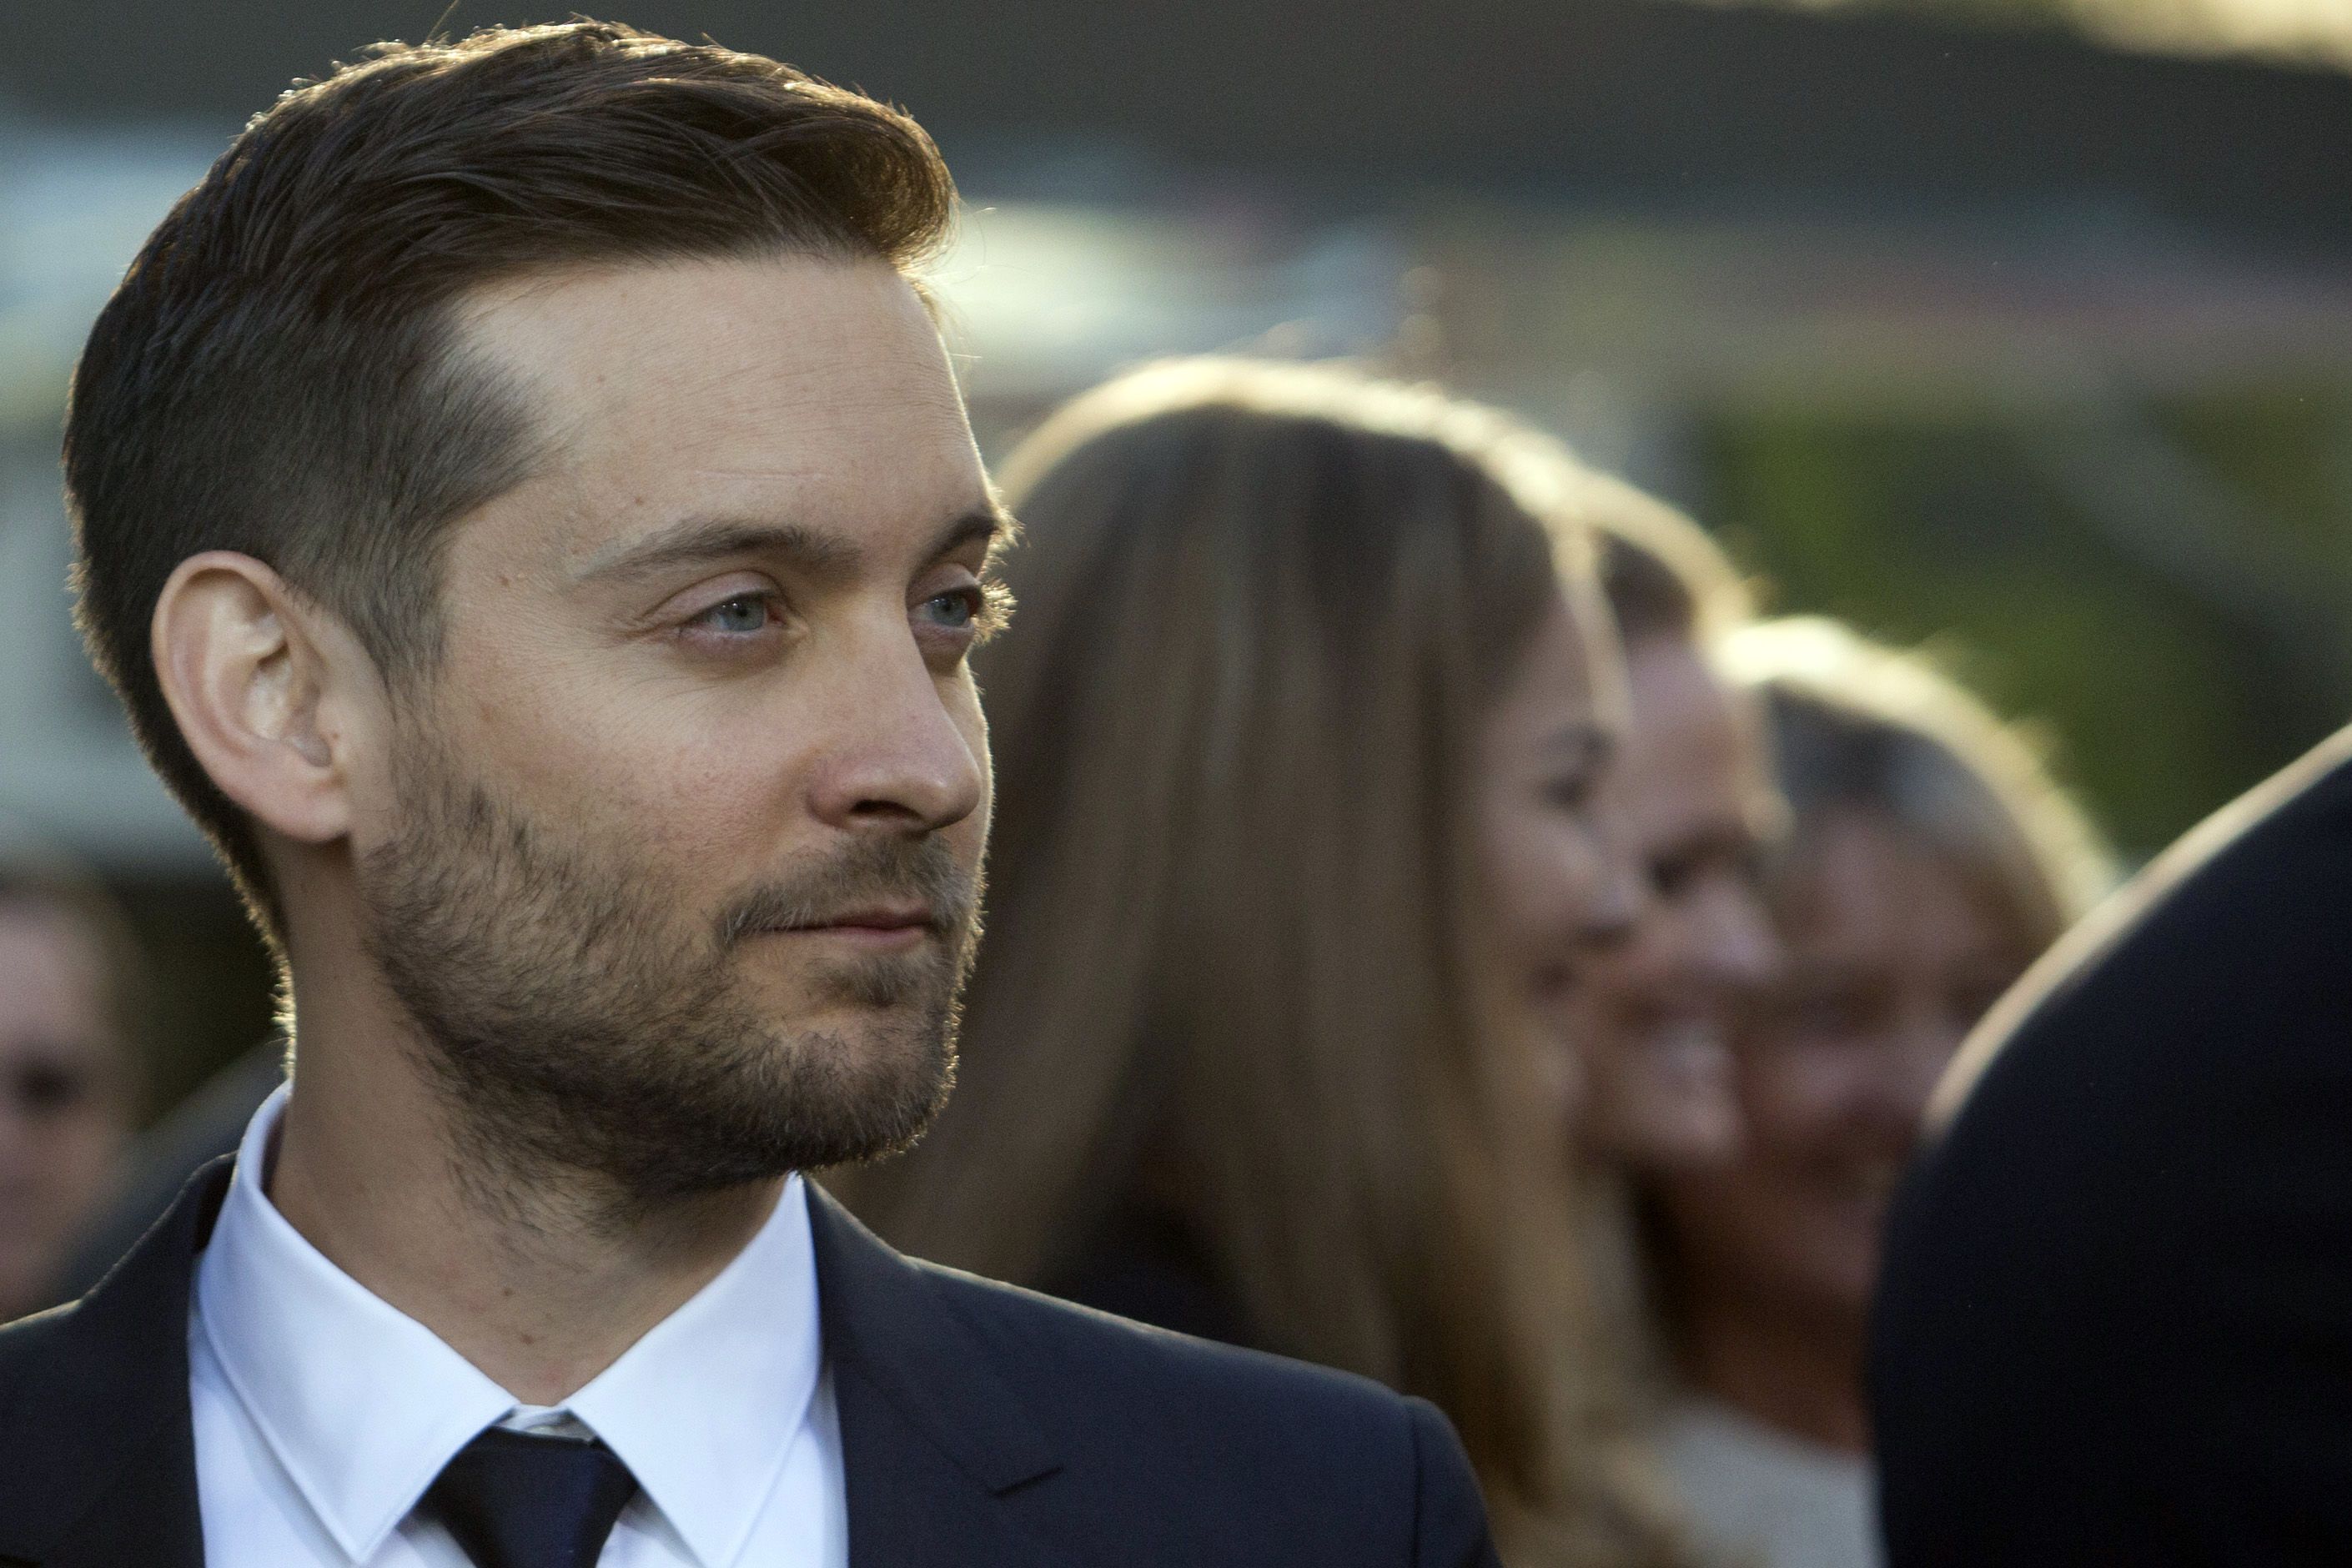 celebrity, tobey maguire, actor, american, face